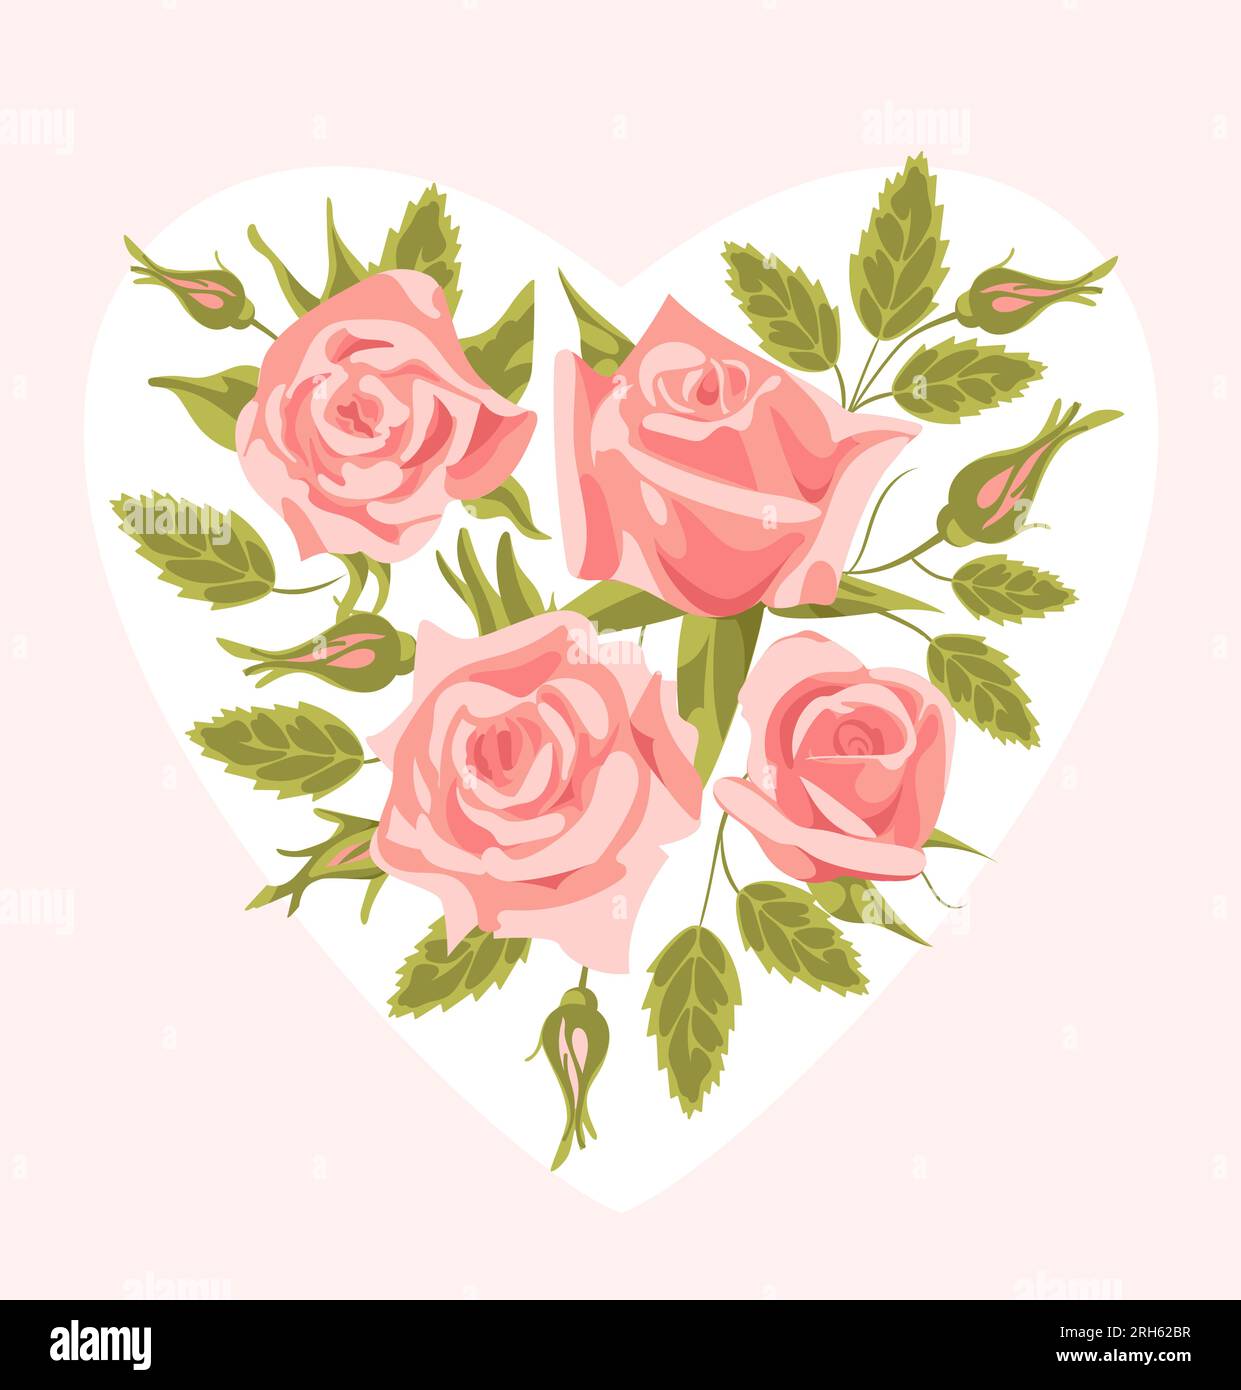 A bouquet of pink flower in the shape of a heart. Realistic style, roses, vintage. For Valentines Day, weddings, design elements, prints on fabric. Stock Vector